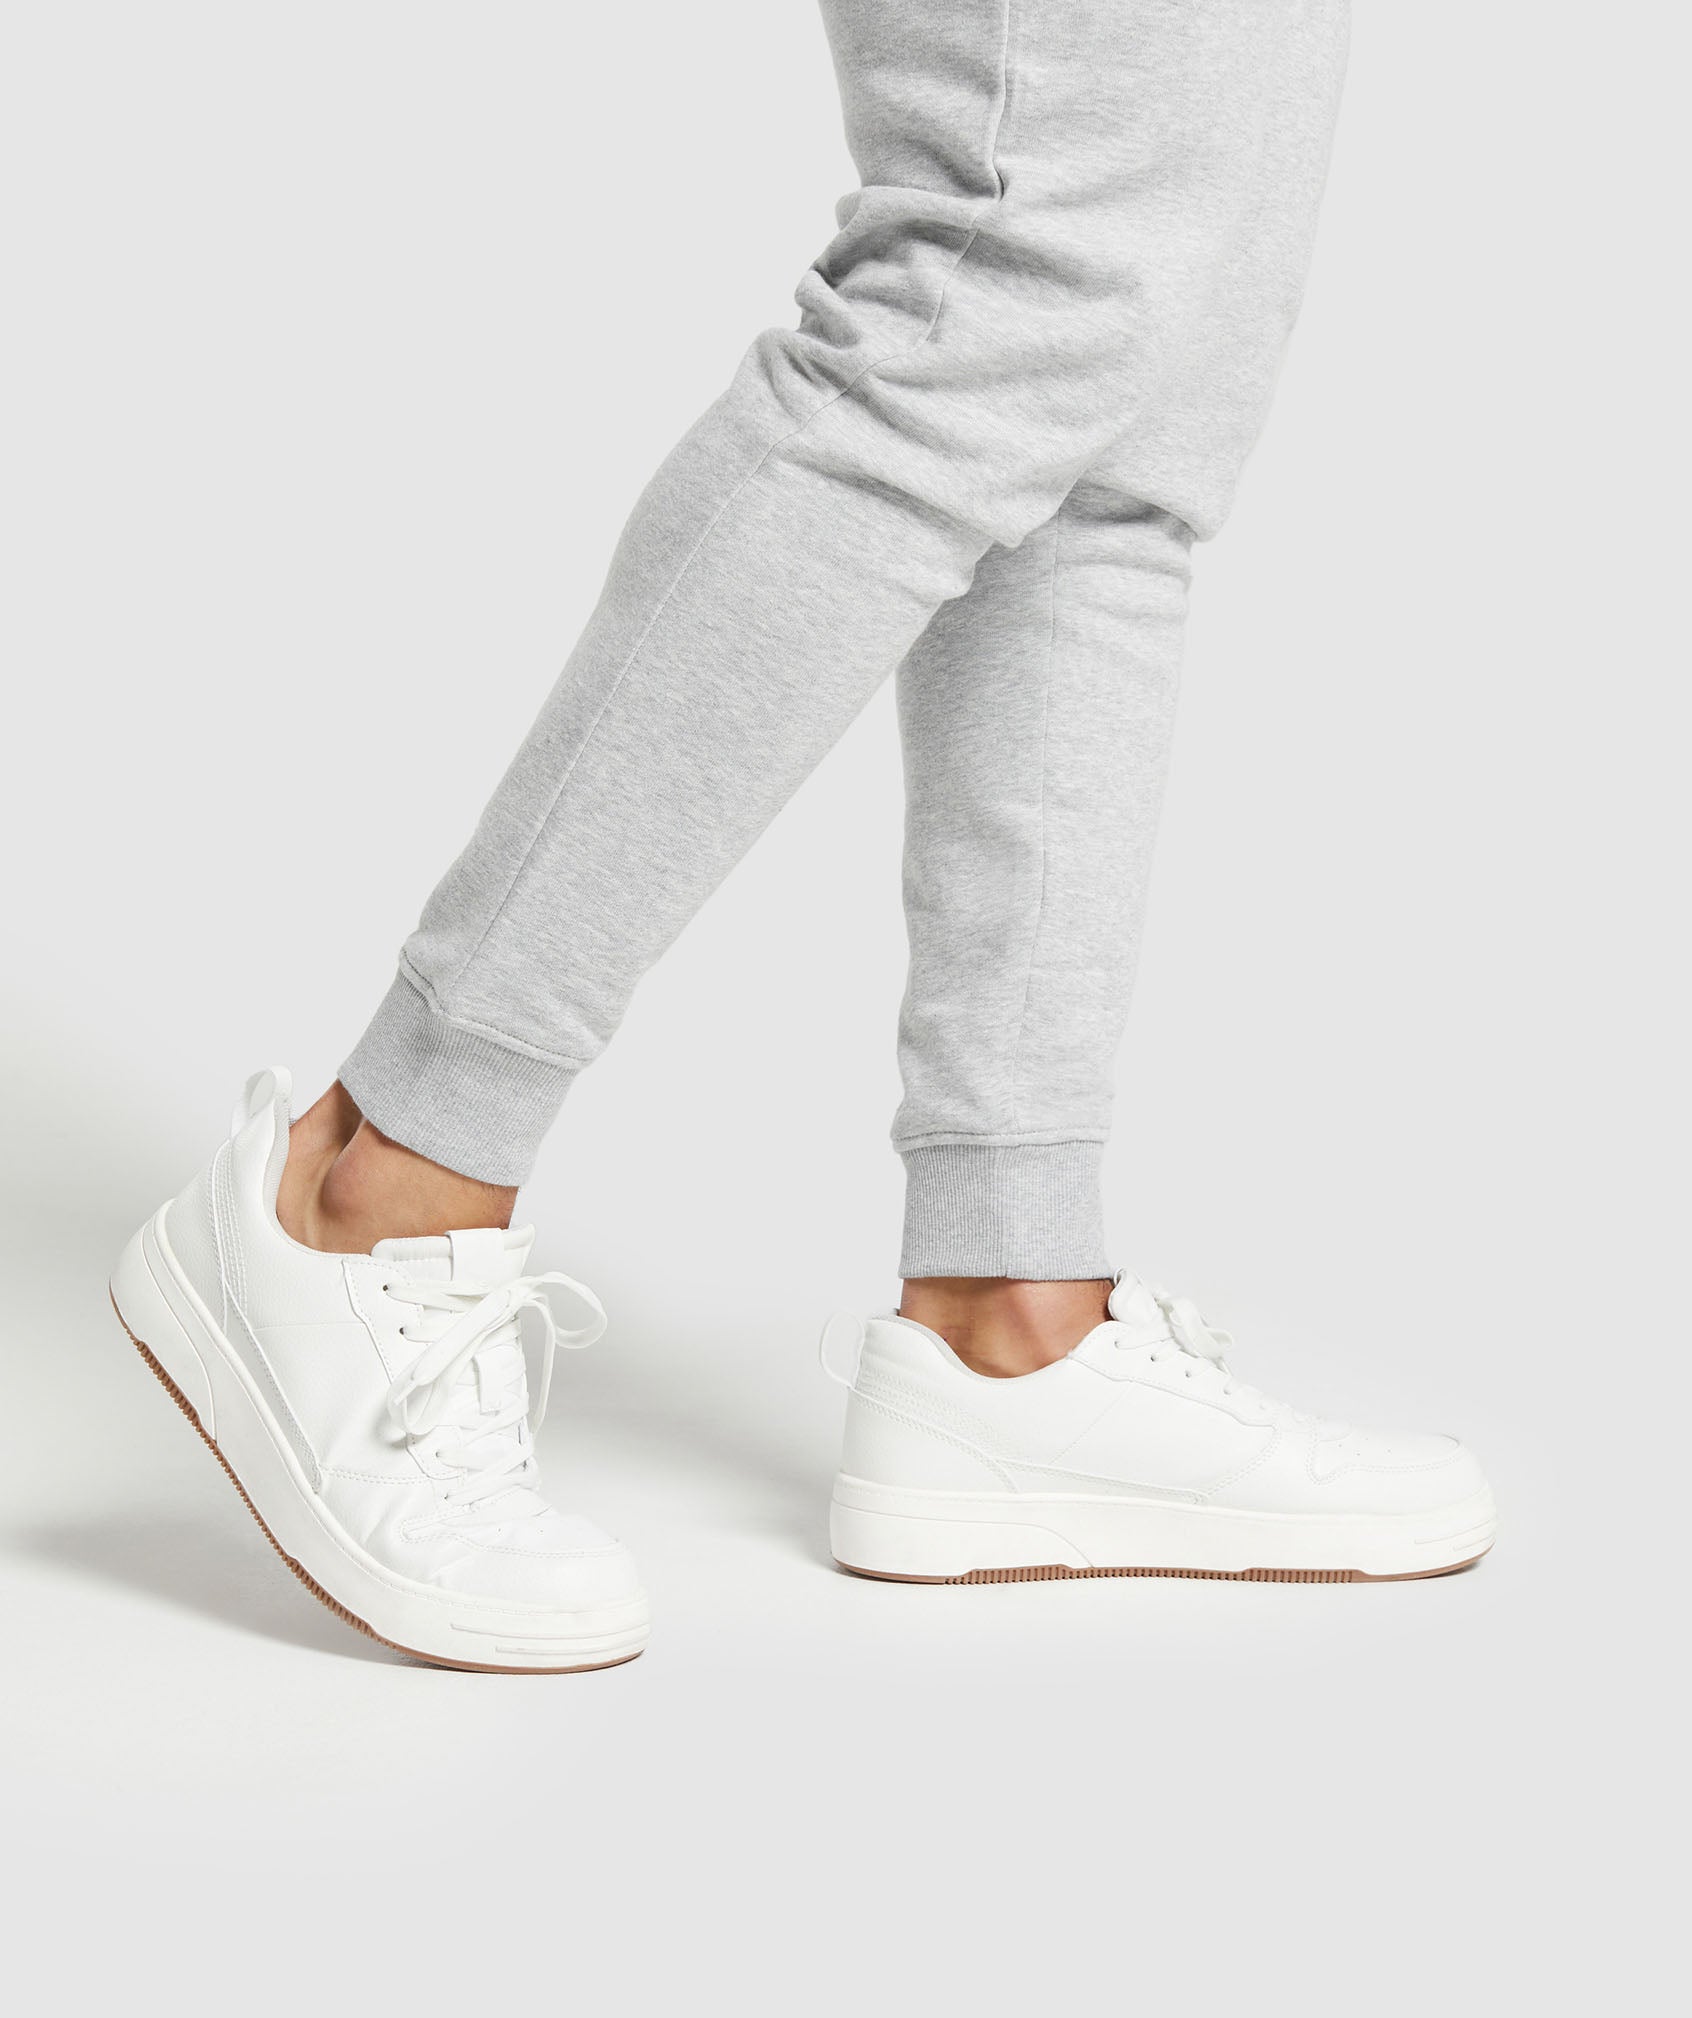 Crest Joggers in Light Grey Marl - view 6